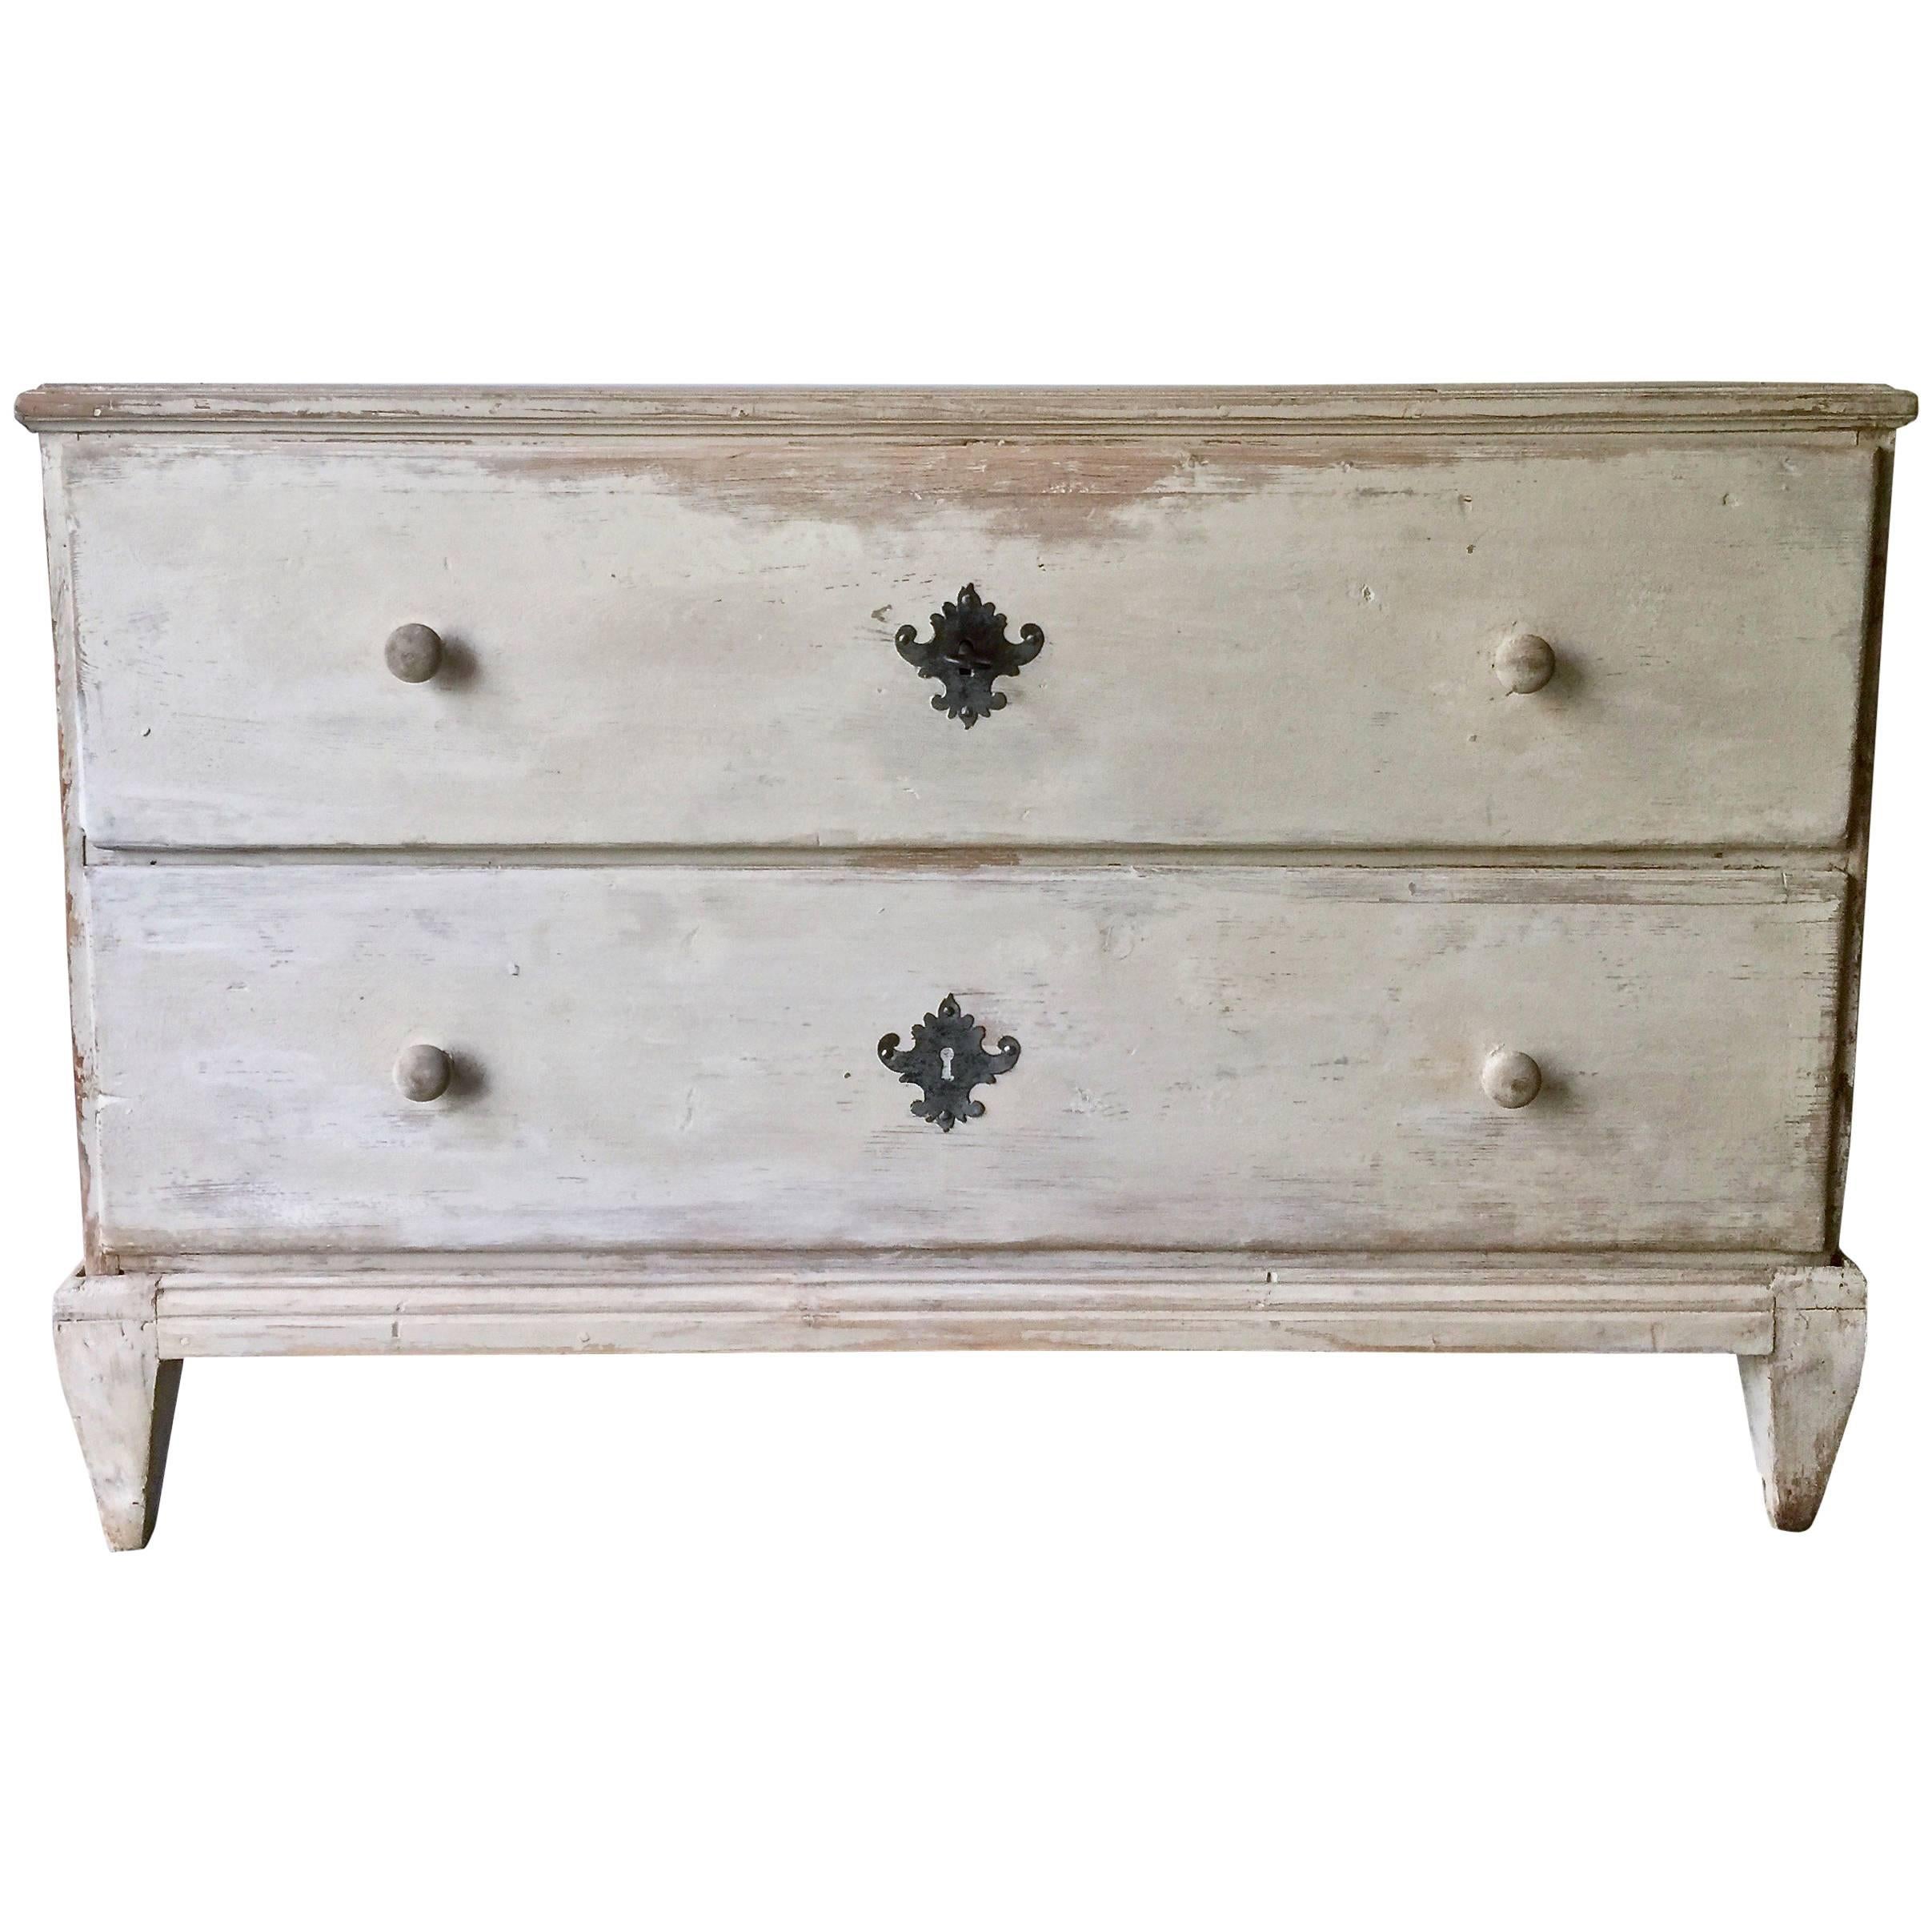 19th Century Two-Drawer Chest on Stand